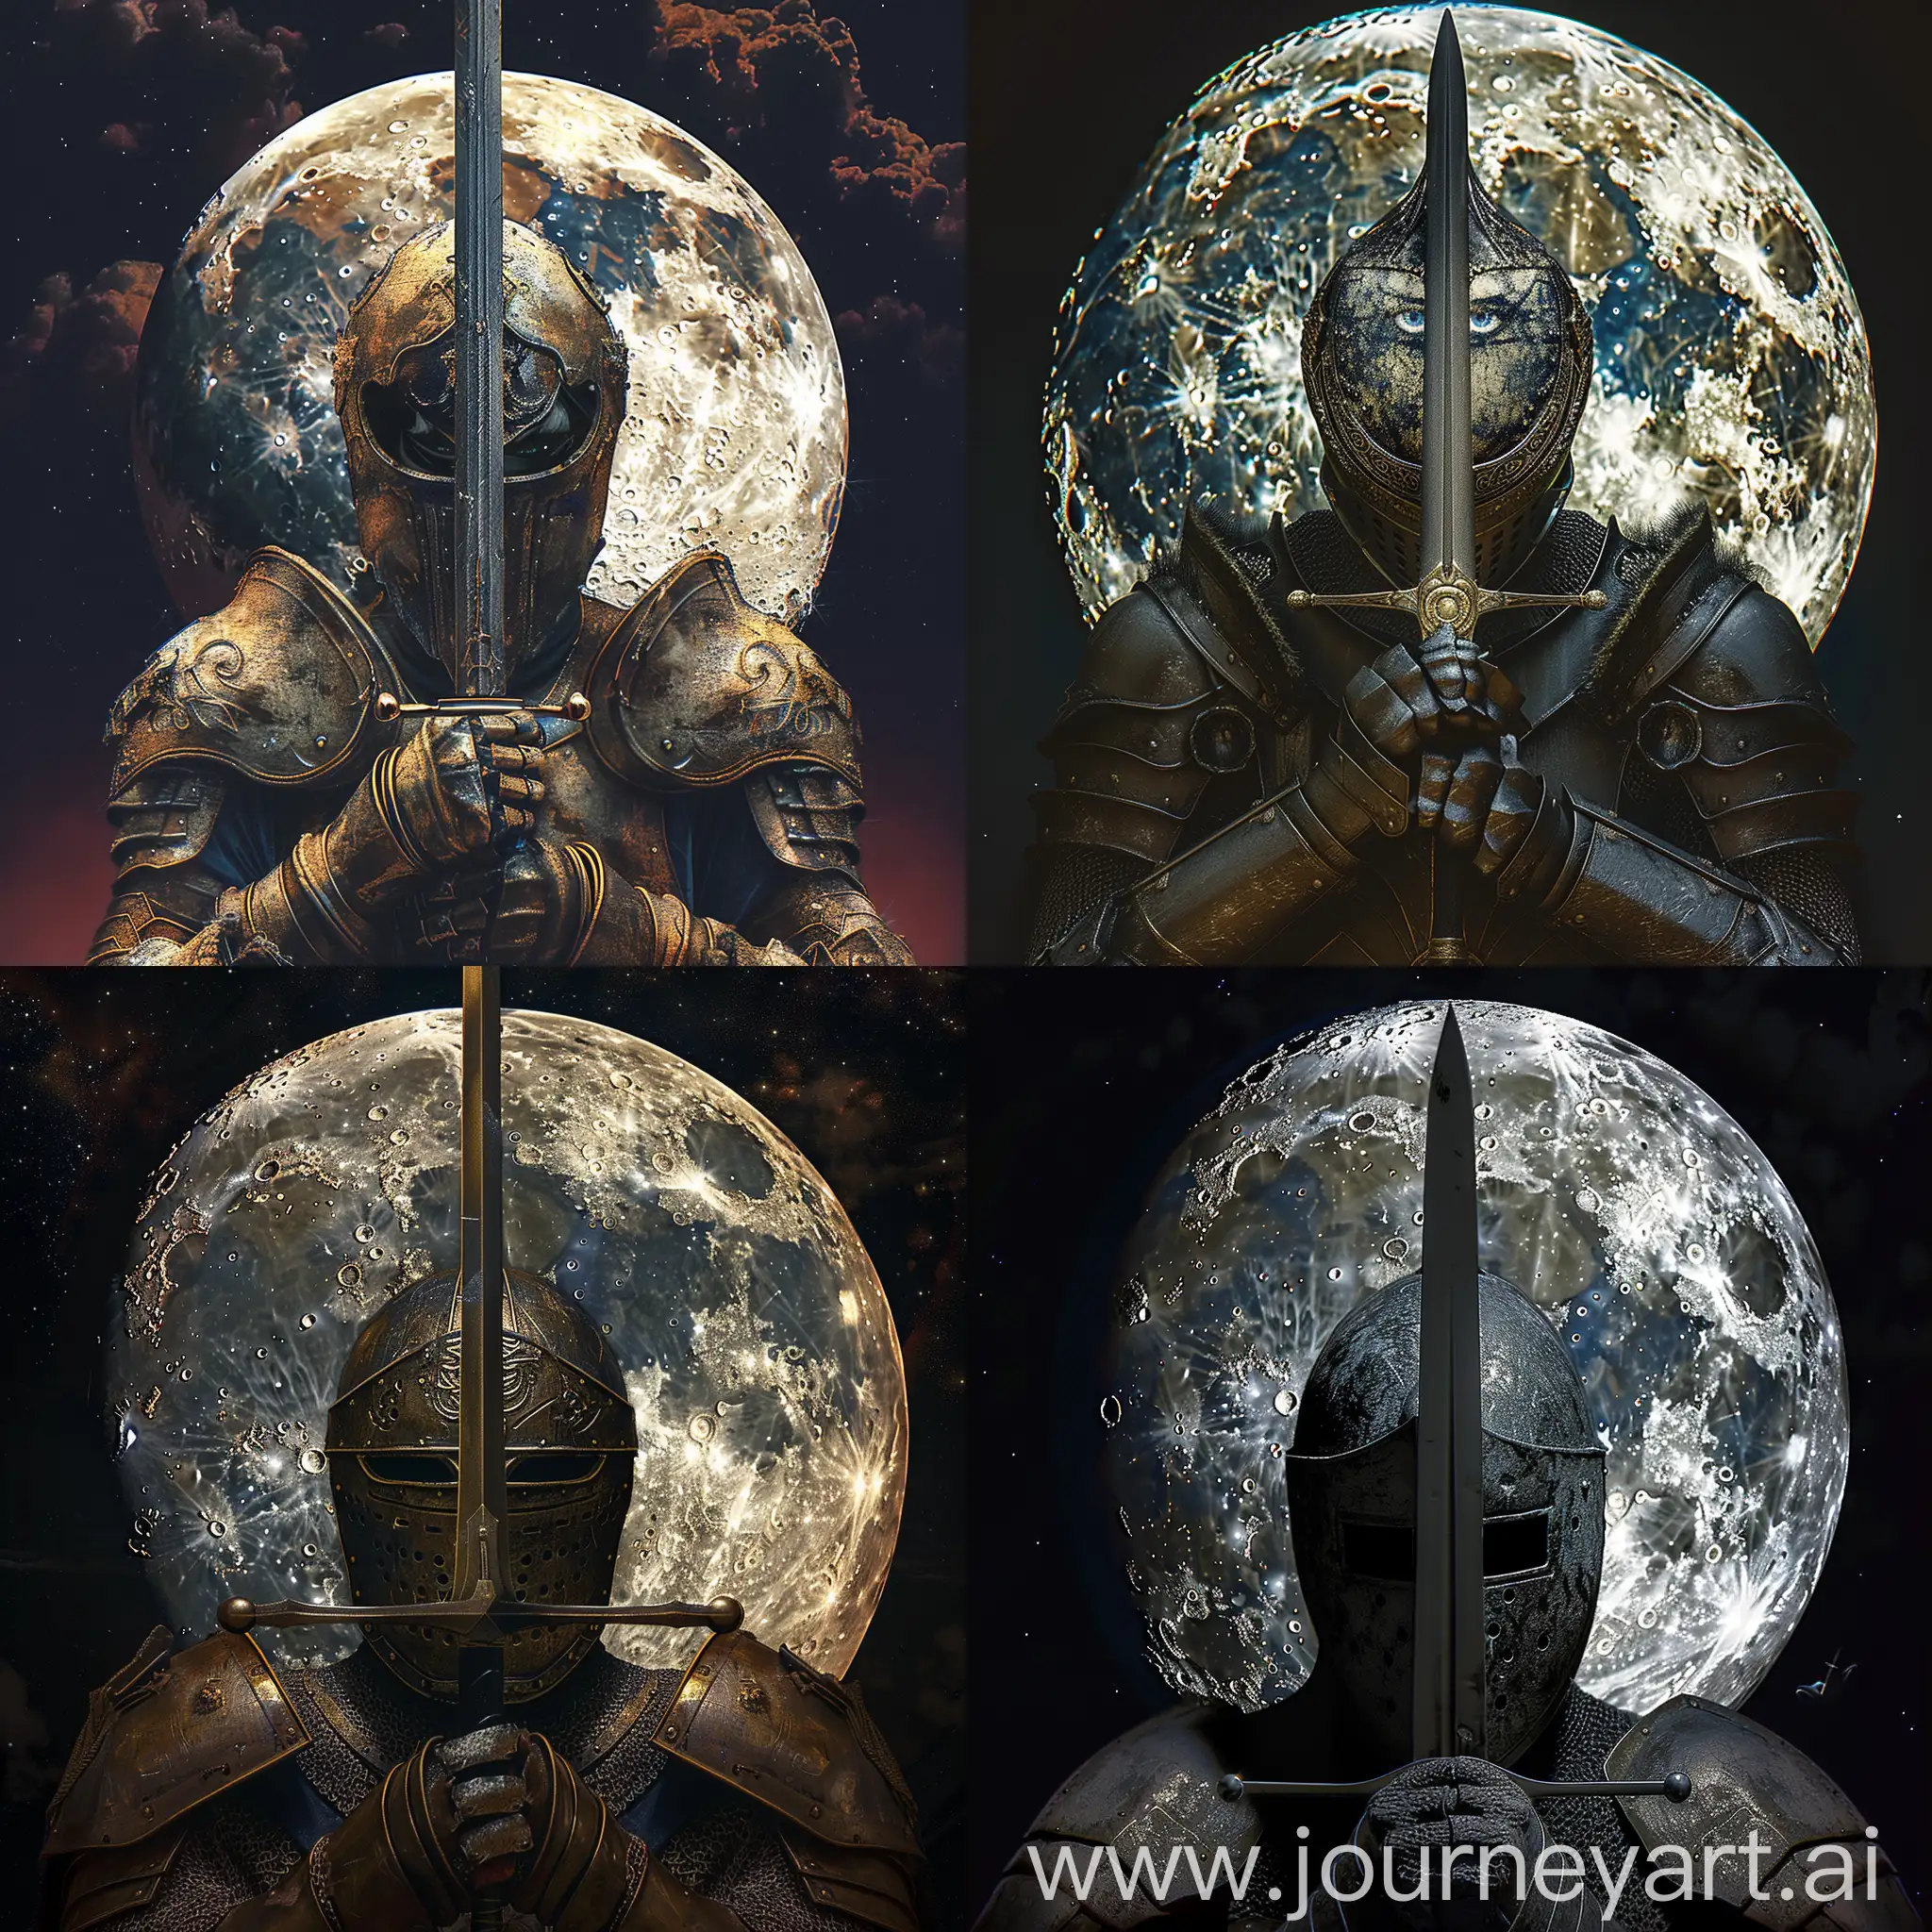 a moon with a fantasy knight in it, the knight brings a sword in front of his face watching right through his weapon